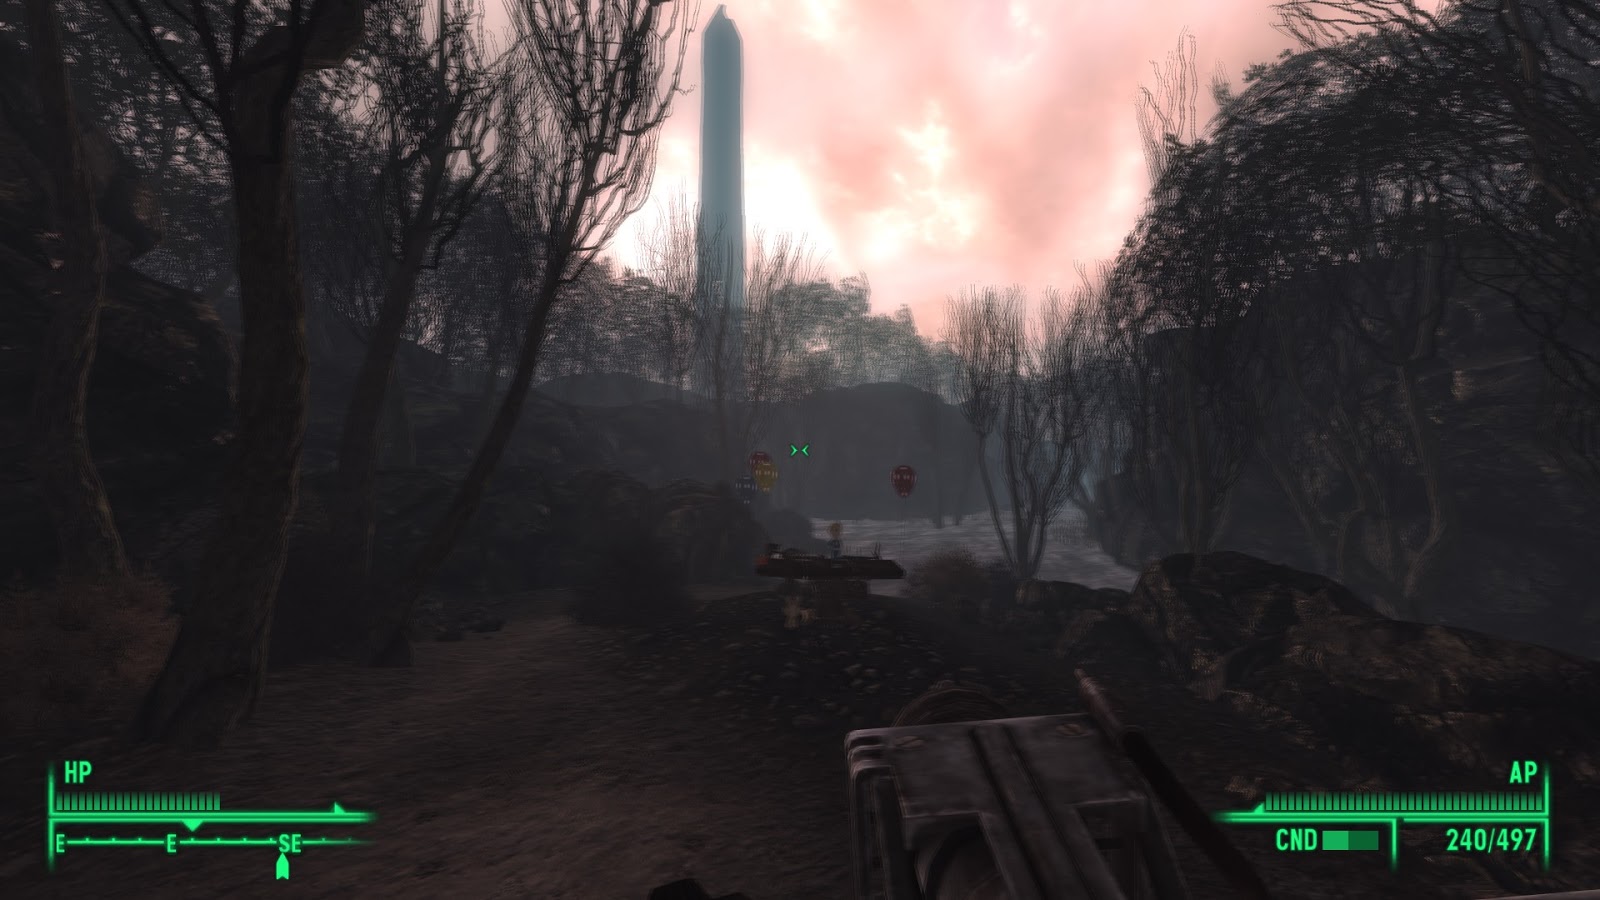 Fallout 3 Point Lookout, PC